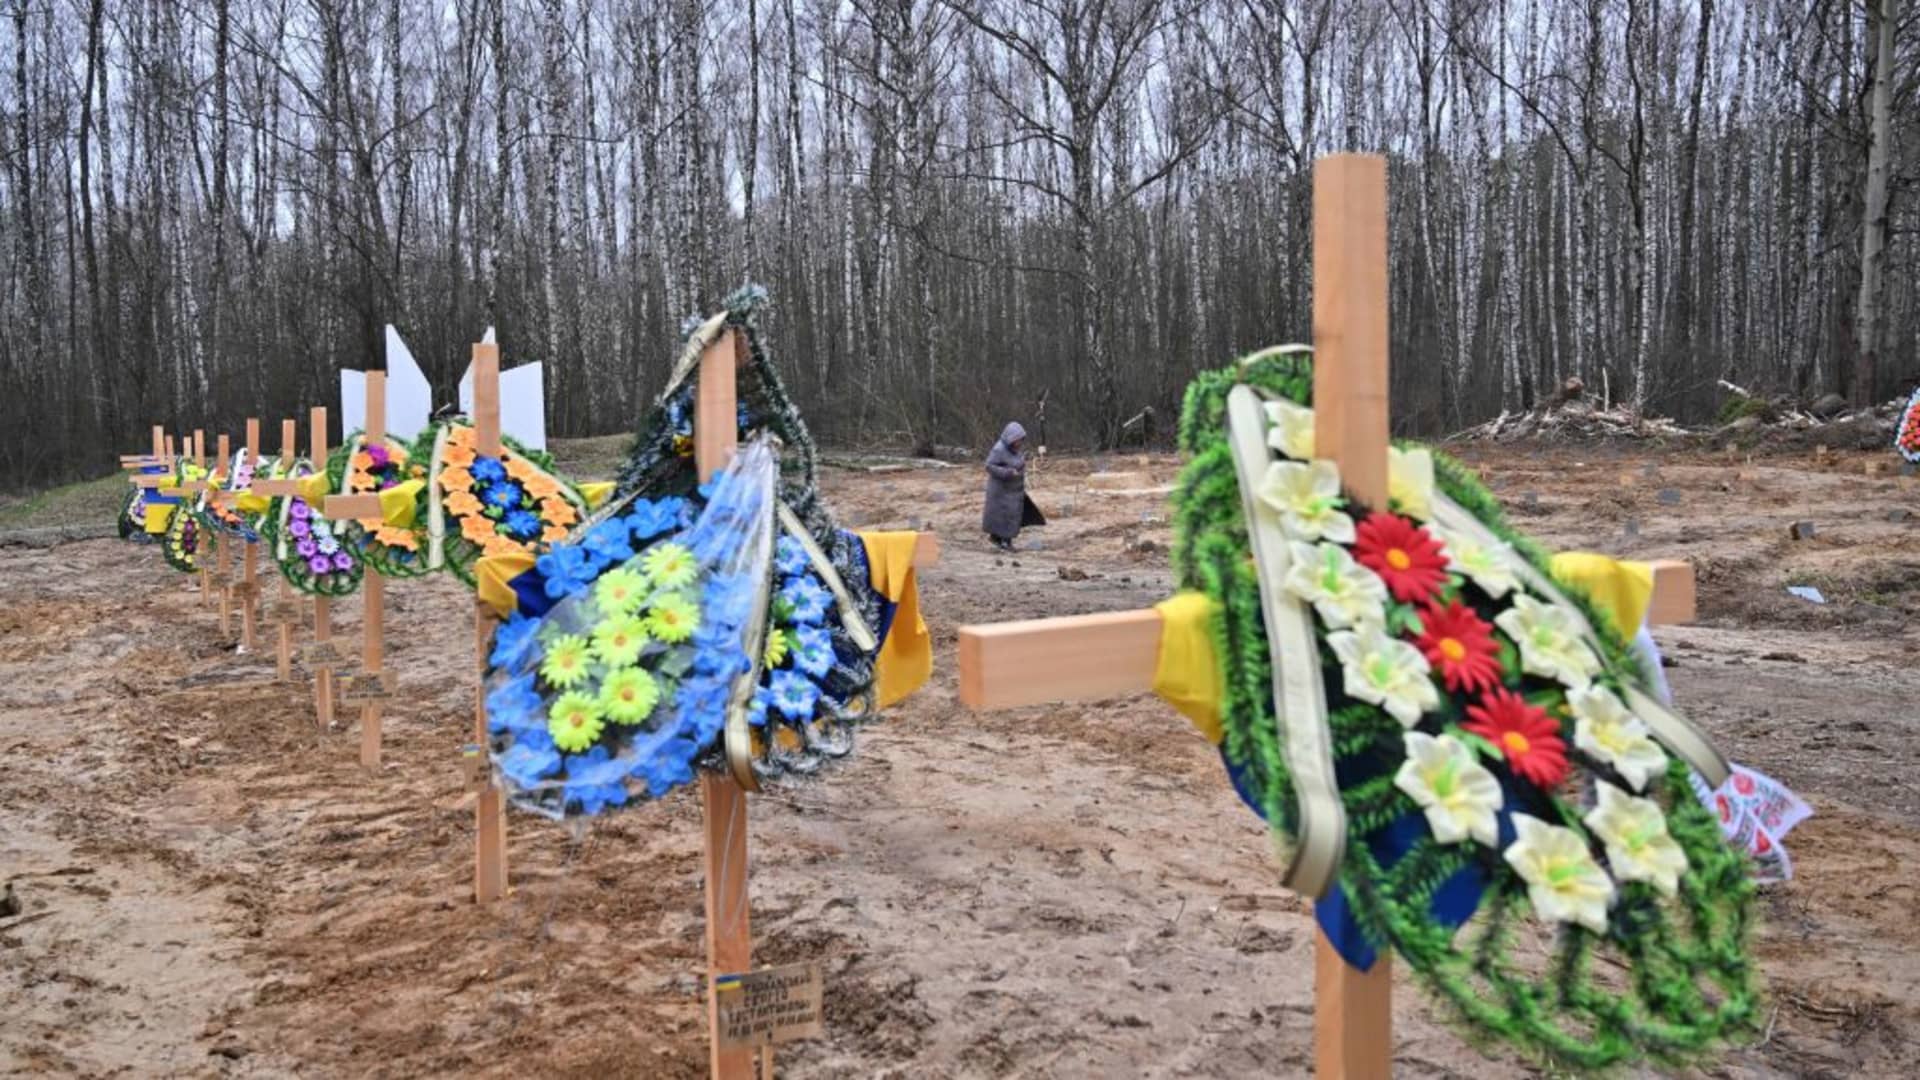 A resident searches for the graves of relatives in a cemetery in Chernihiv, northern Ukraine, on April 5, 2022.